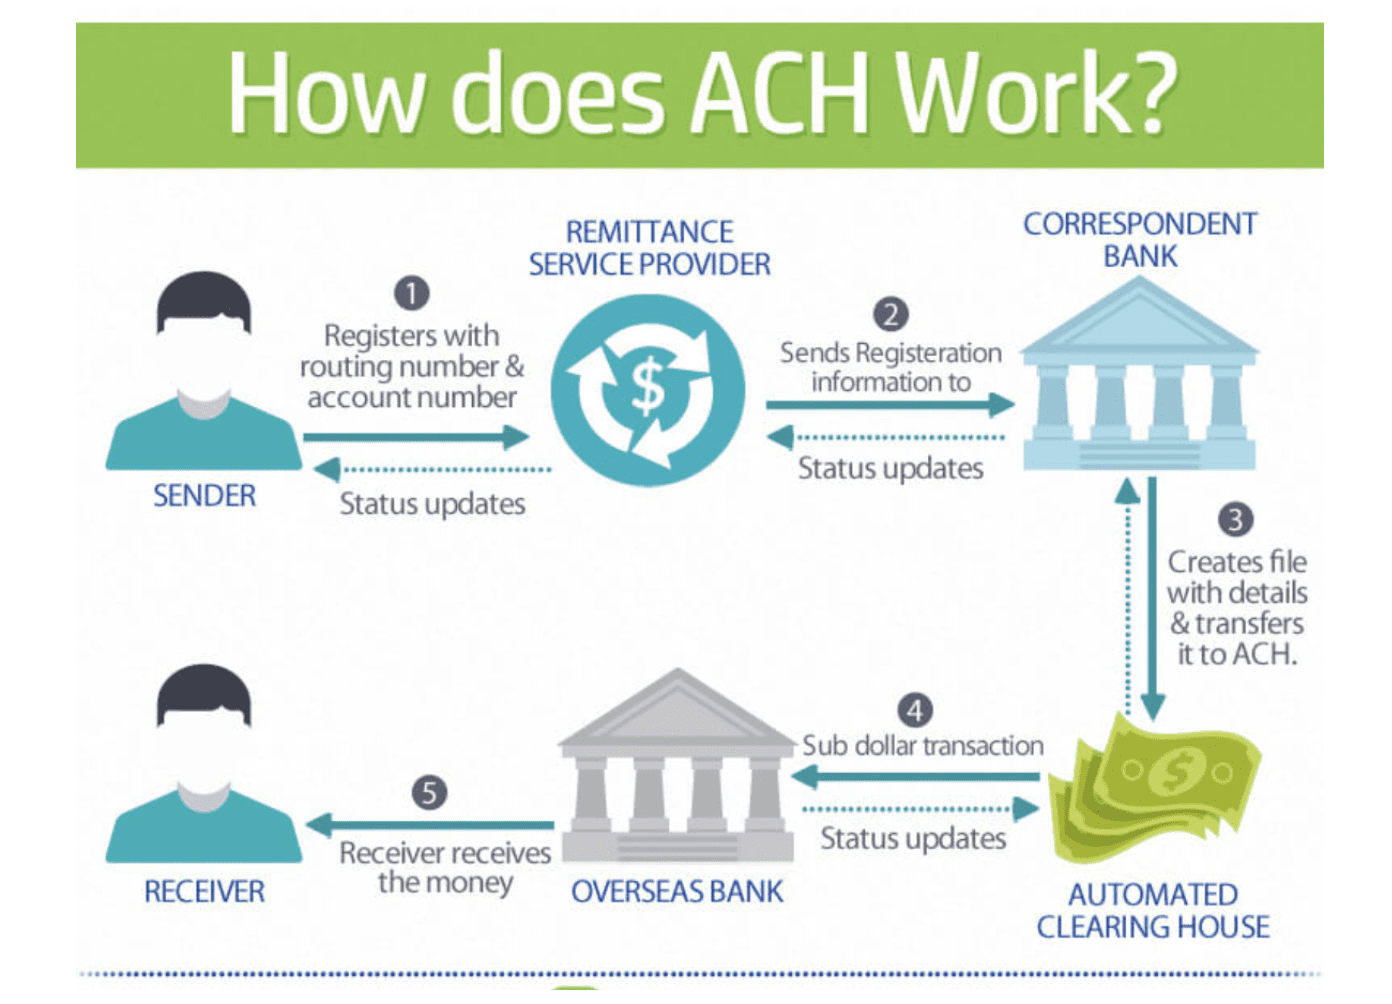 ACH transfer which is also known as direct deposit stands for Automated Clearing House